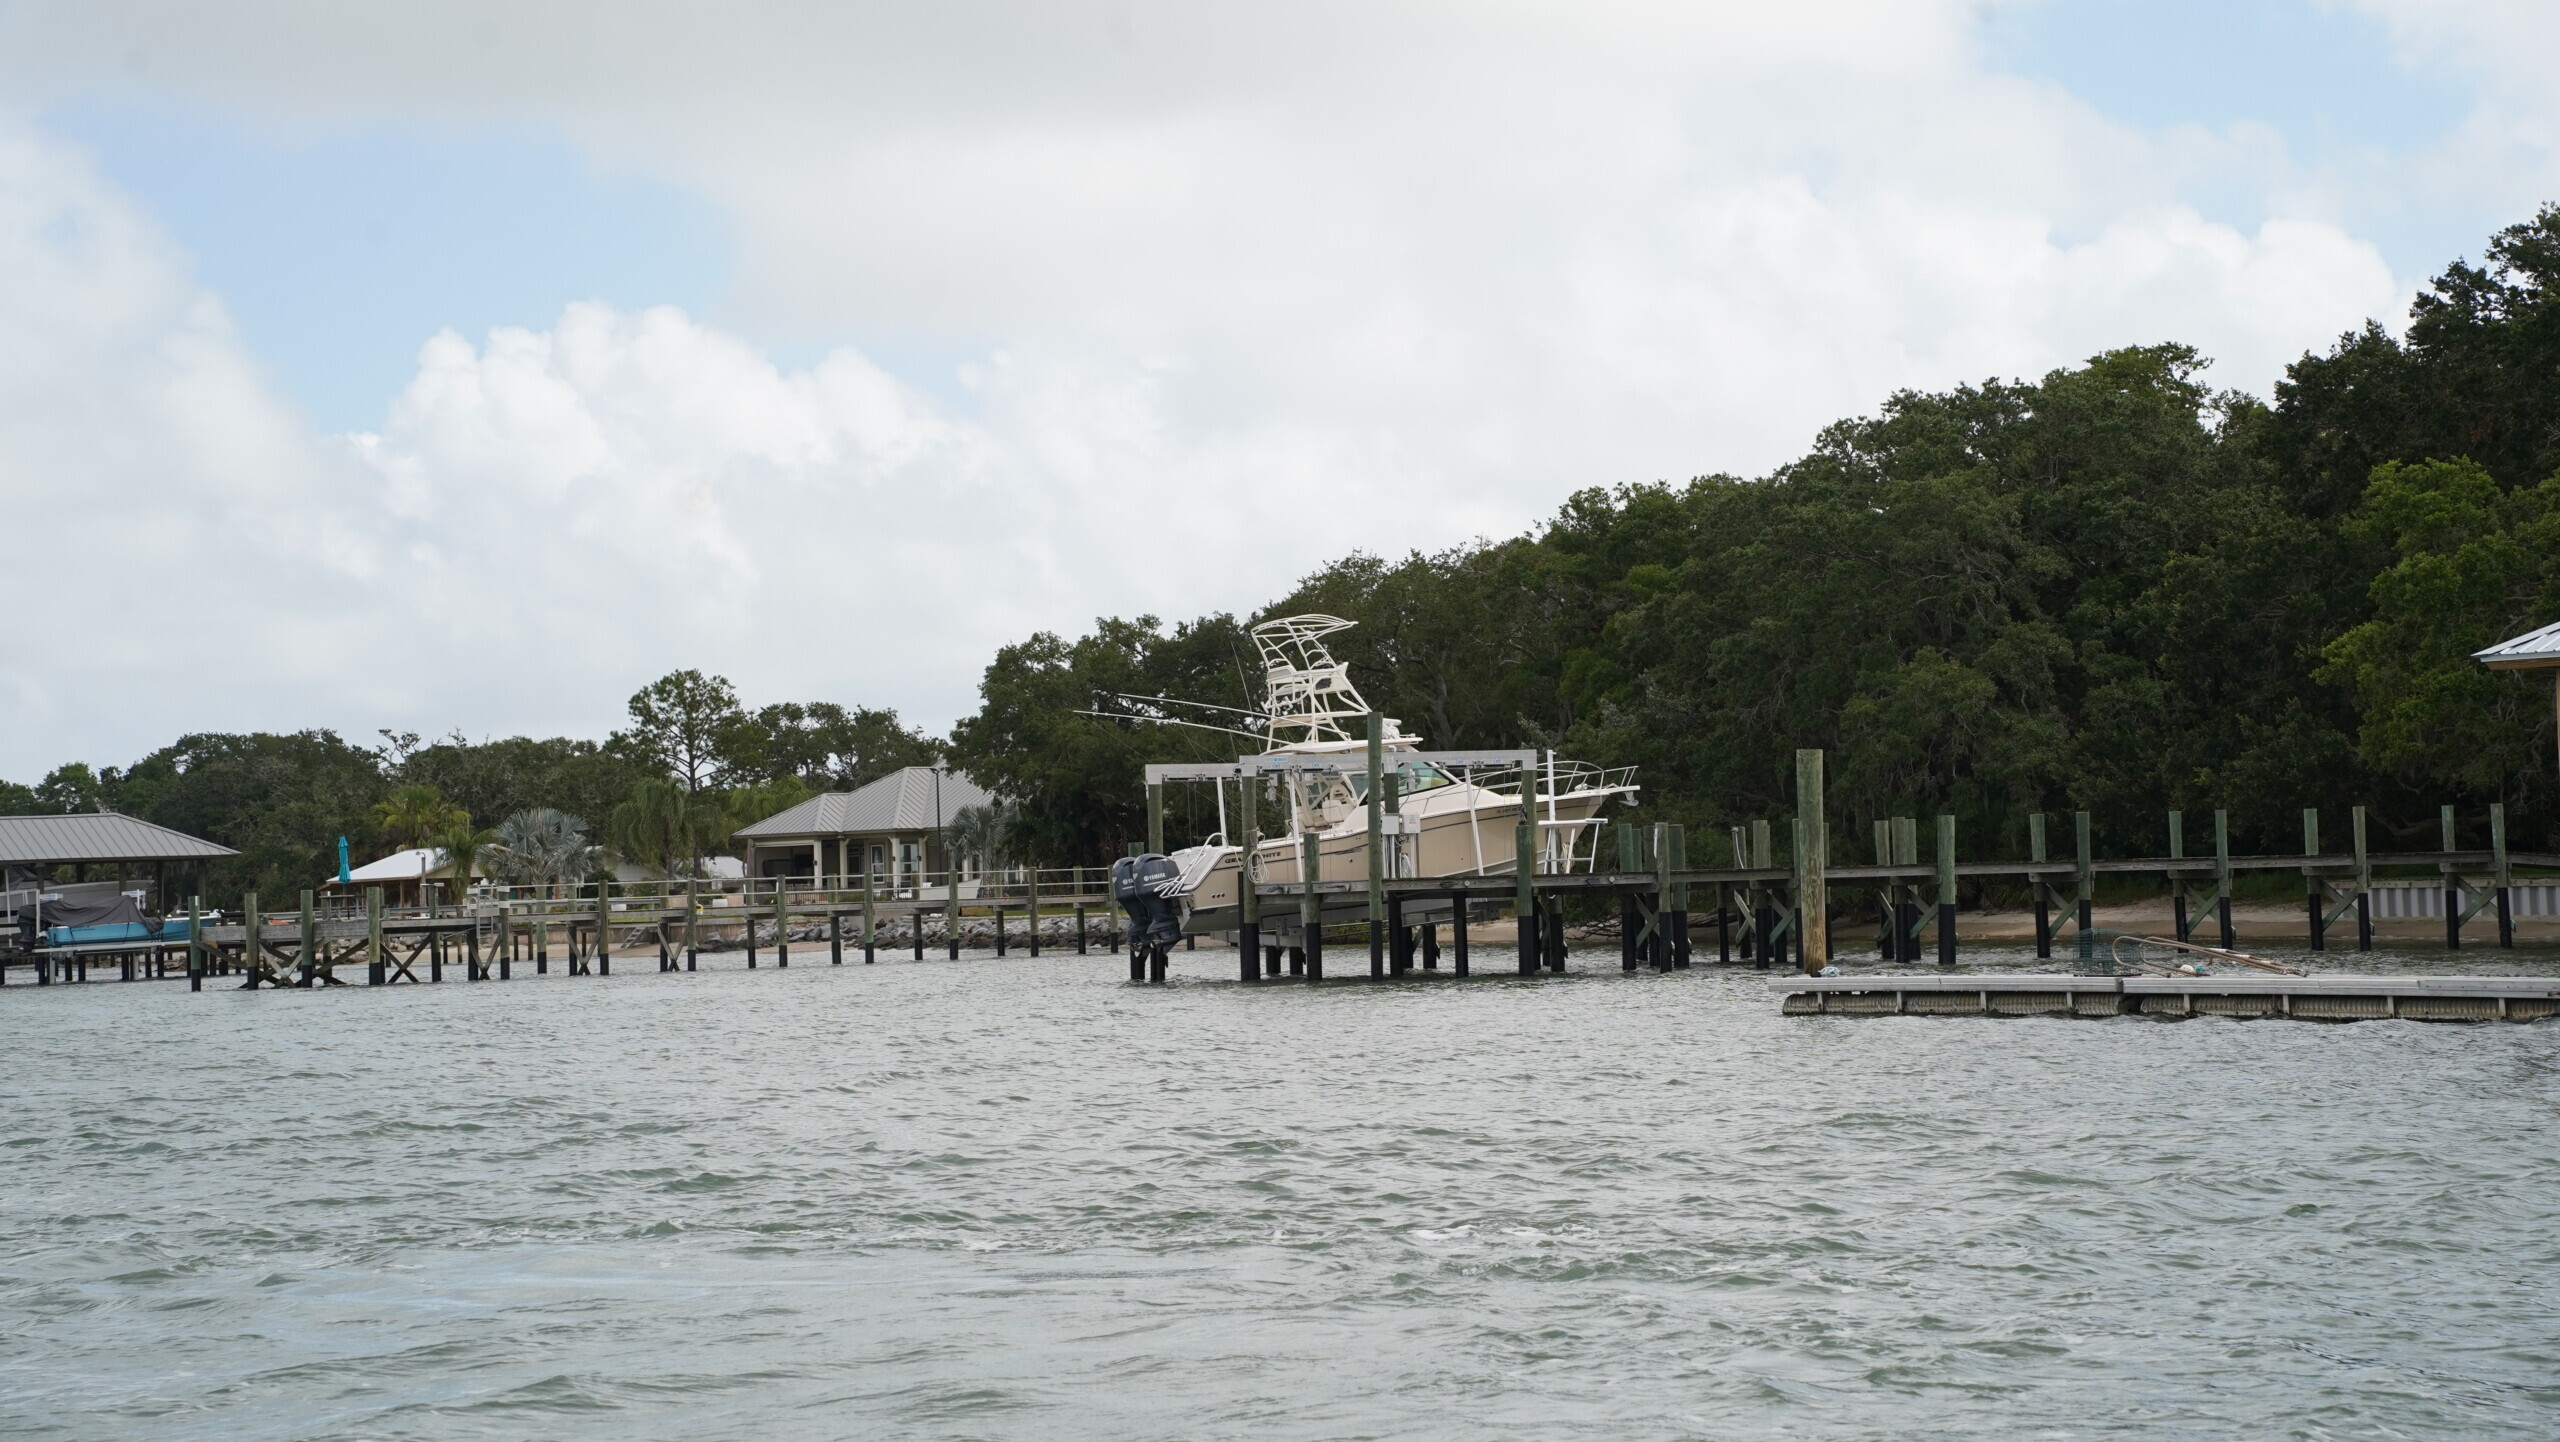 Piers like these in St. Johns County's North Beach community are easily inundated when high storm surge floods the area. | St. Johns County